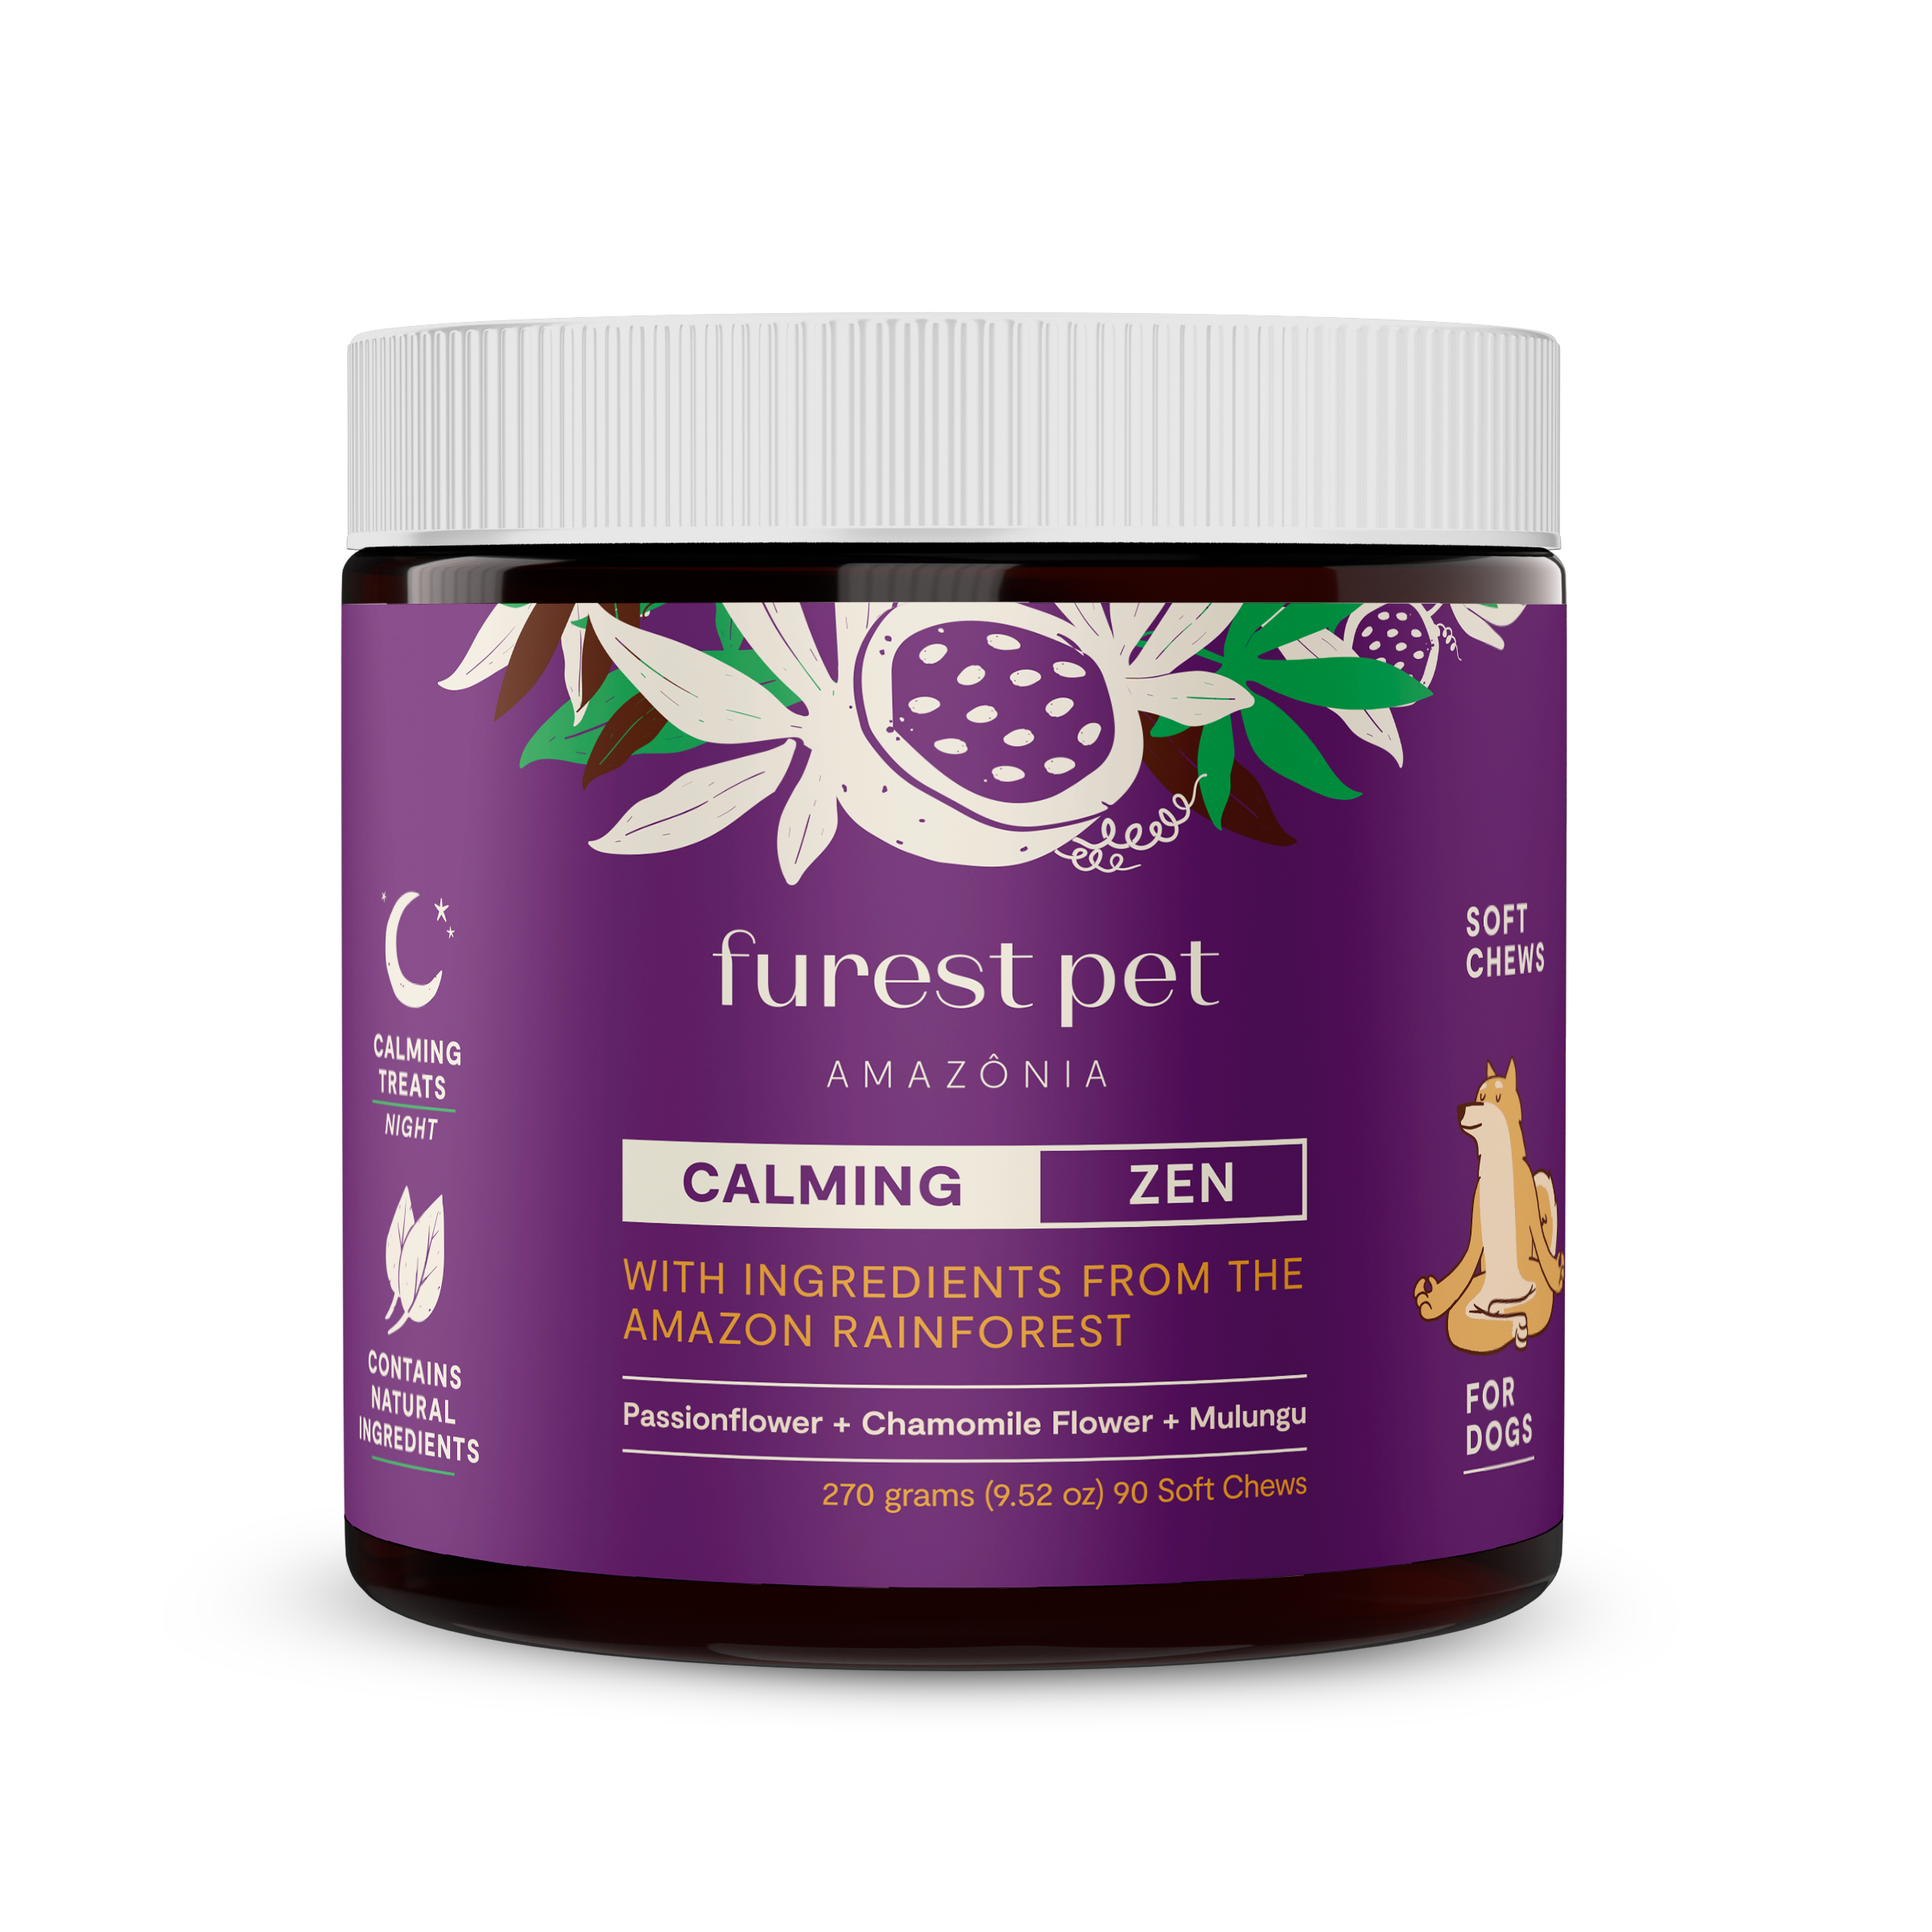 Furest pet - Calming Chews for Dogs - Anxiety & Stress Relief Supplement - Melatonin, L-Theanine, Valerian Root, Chamomile, Tryptophan, Passionflower & Mulungu - Bacon - 90 Count